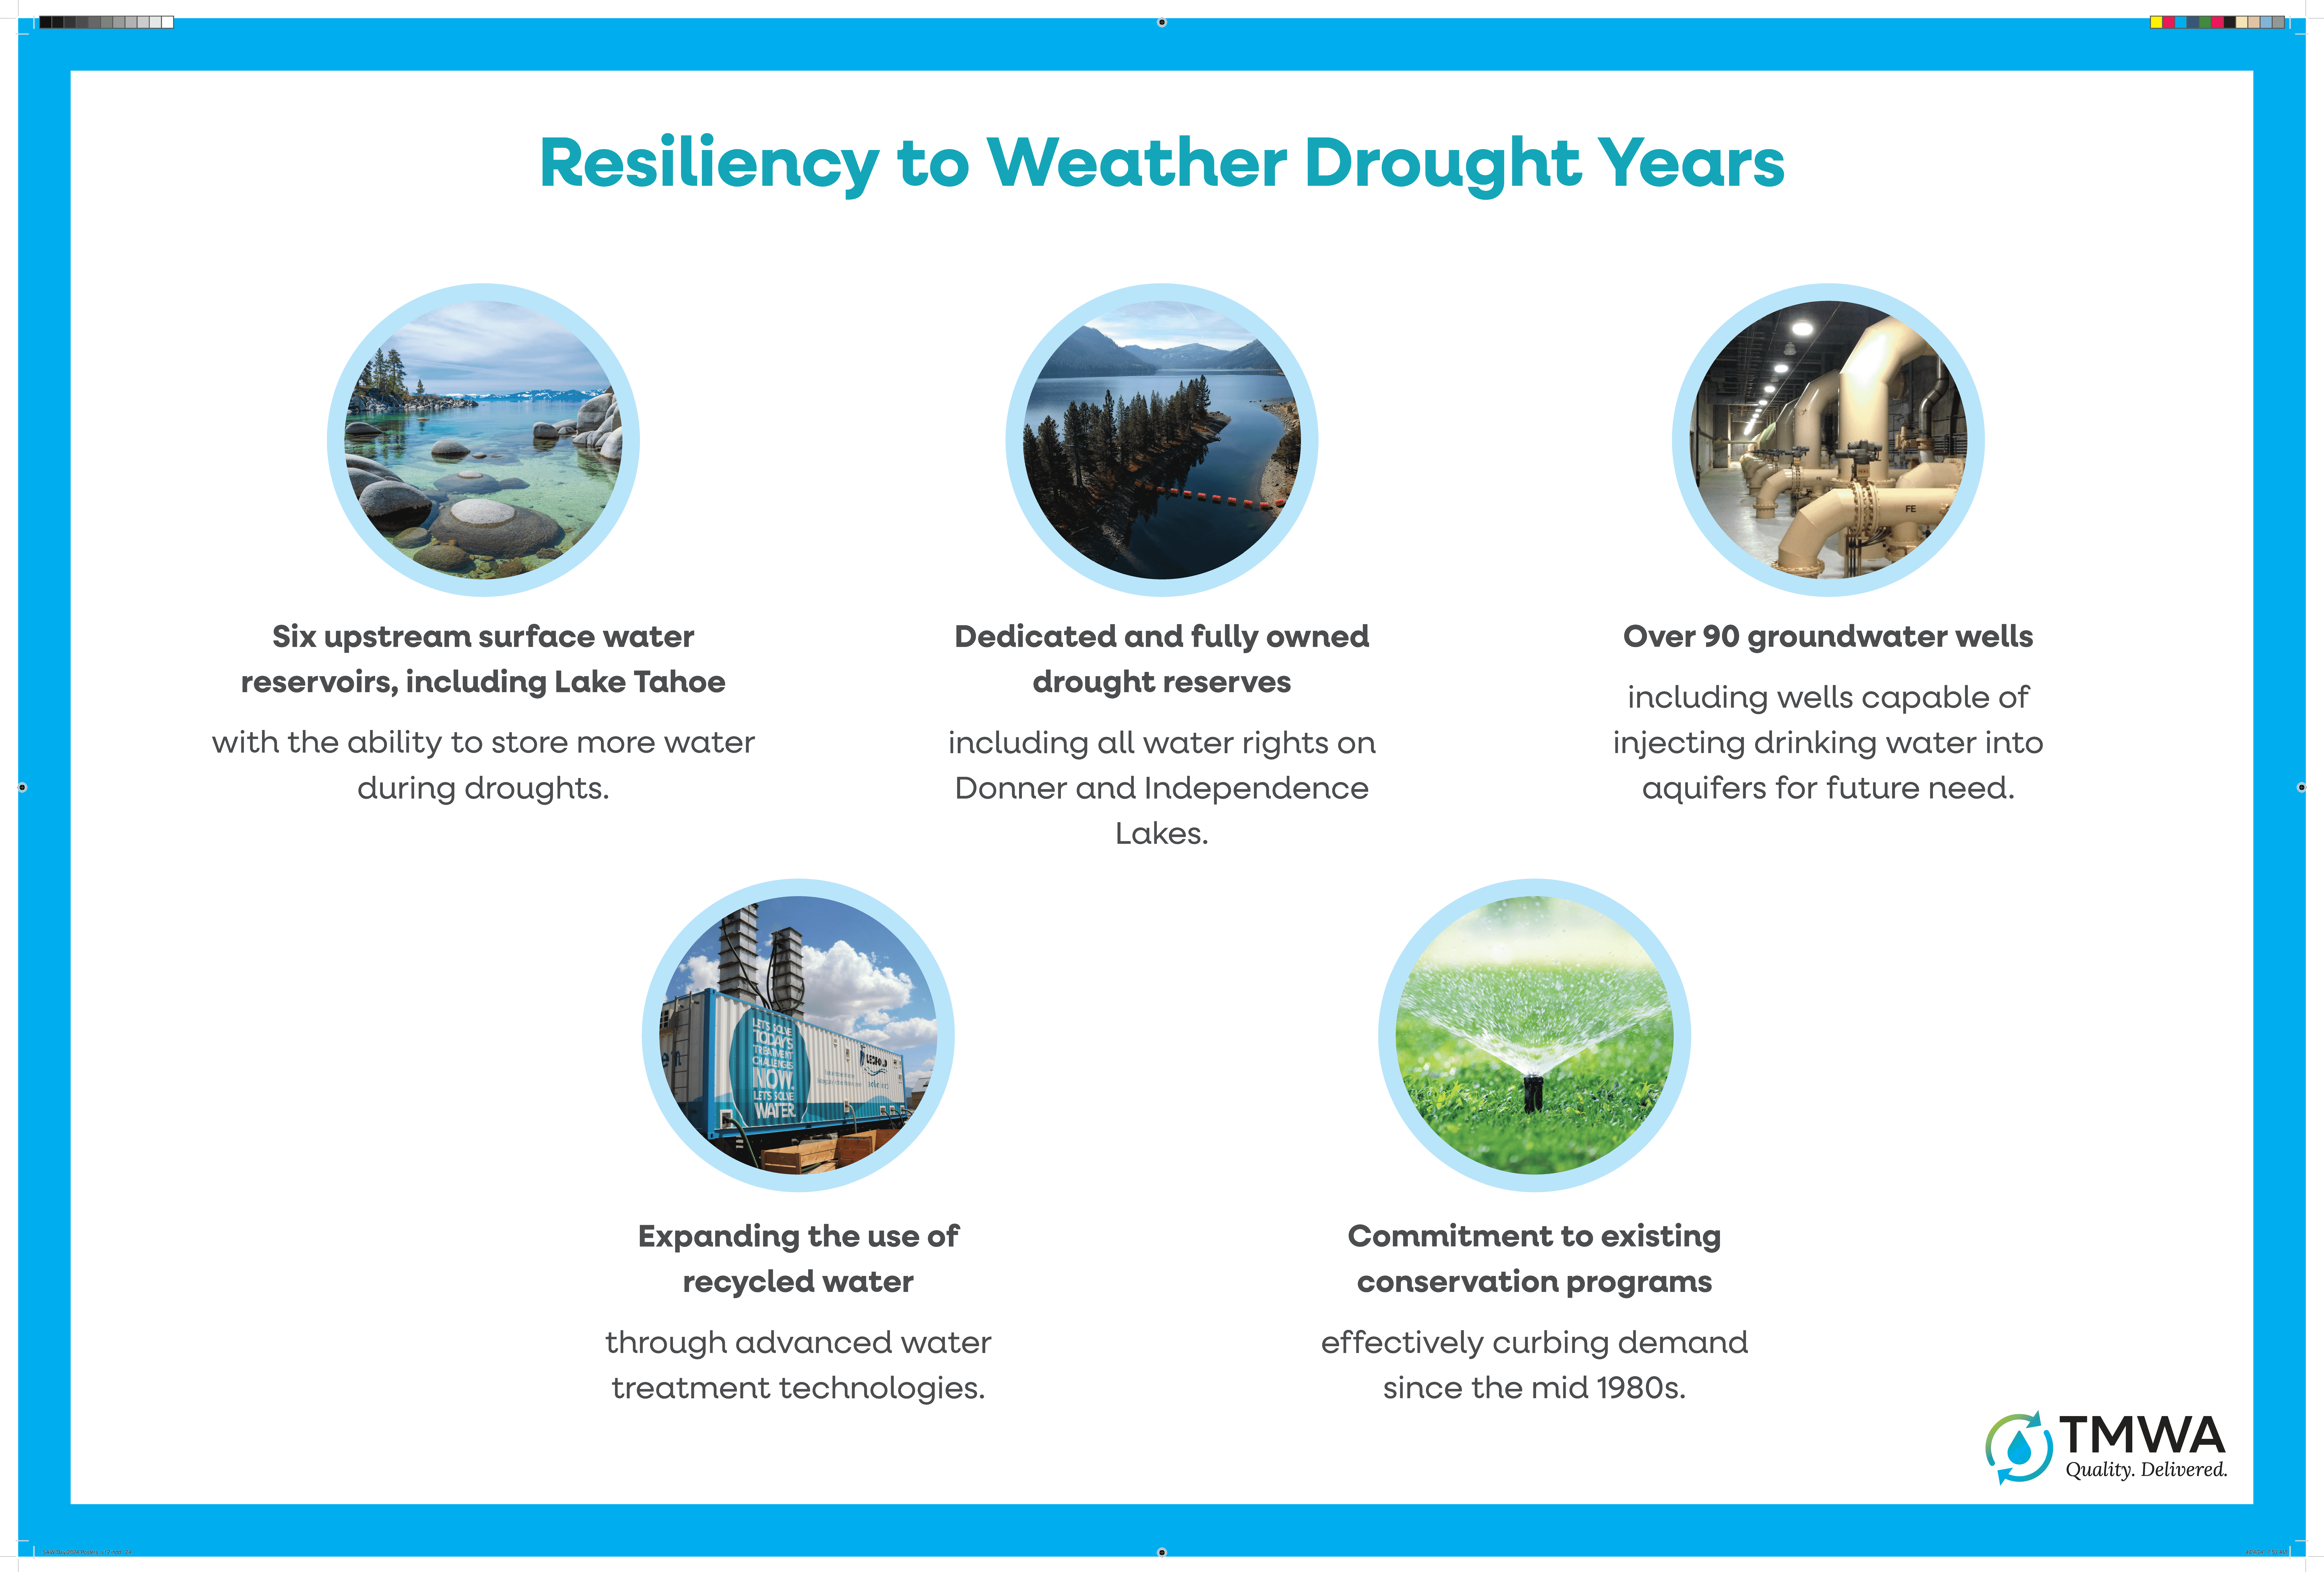 Keys to Drought Resiliency for Reno/Sparks